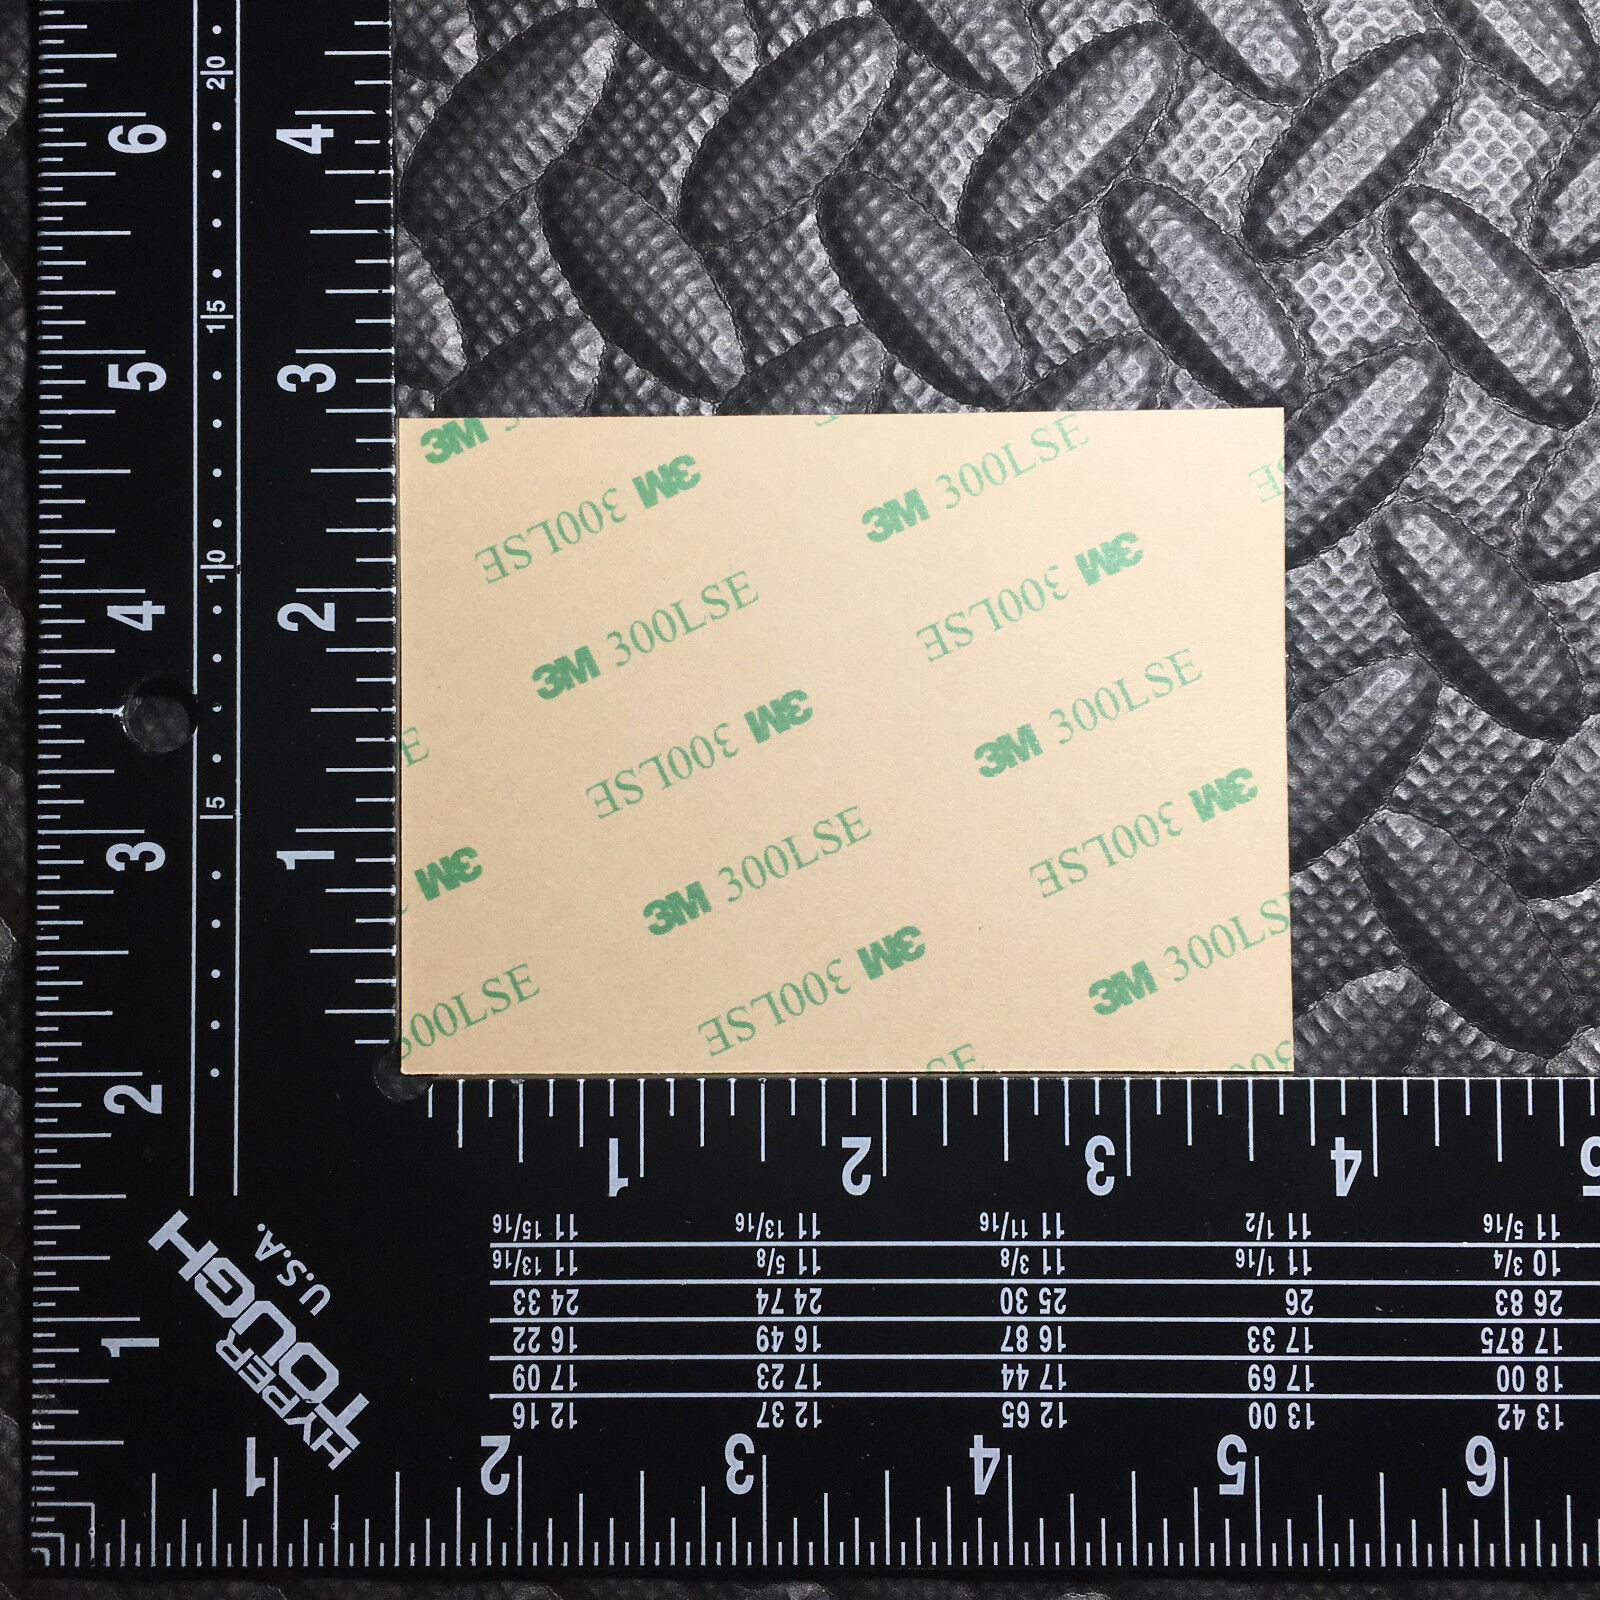 PICK-A-SIZE 3M 300LSE .1MM THIN DOUBLE SIDED ADHESIVE SHEET LOW PRICES READ/ASK